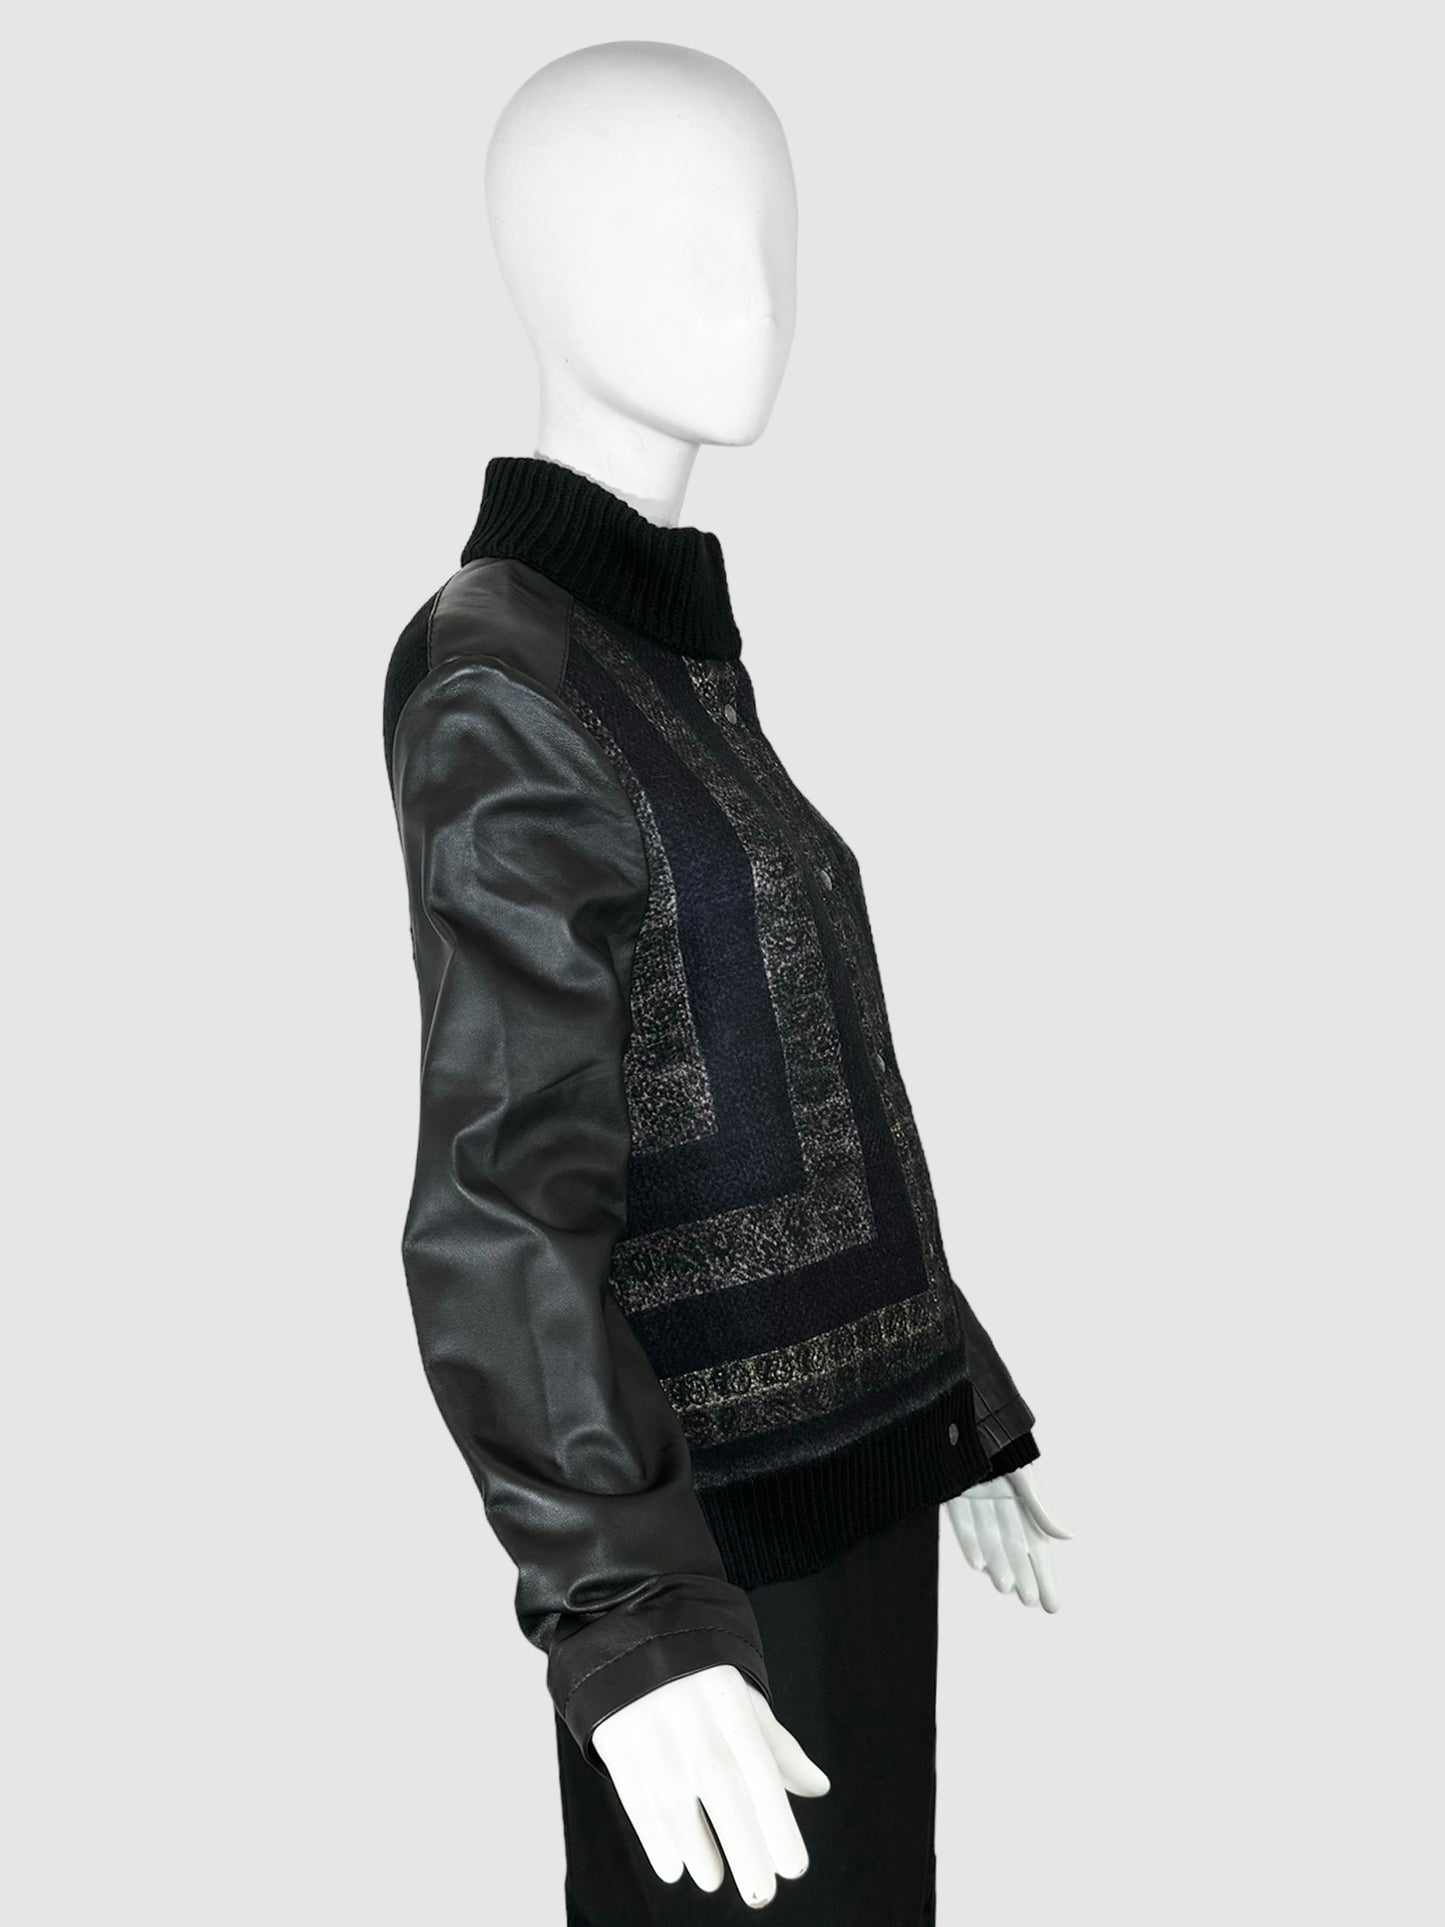 Wool Jacket with Leather Sleeves - Size M/L